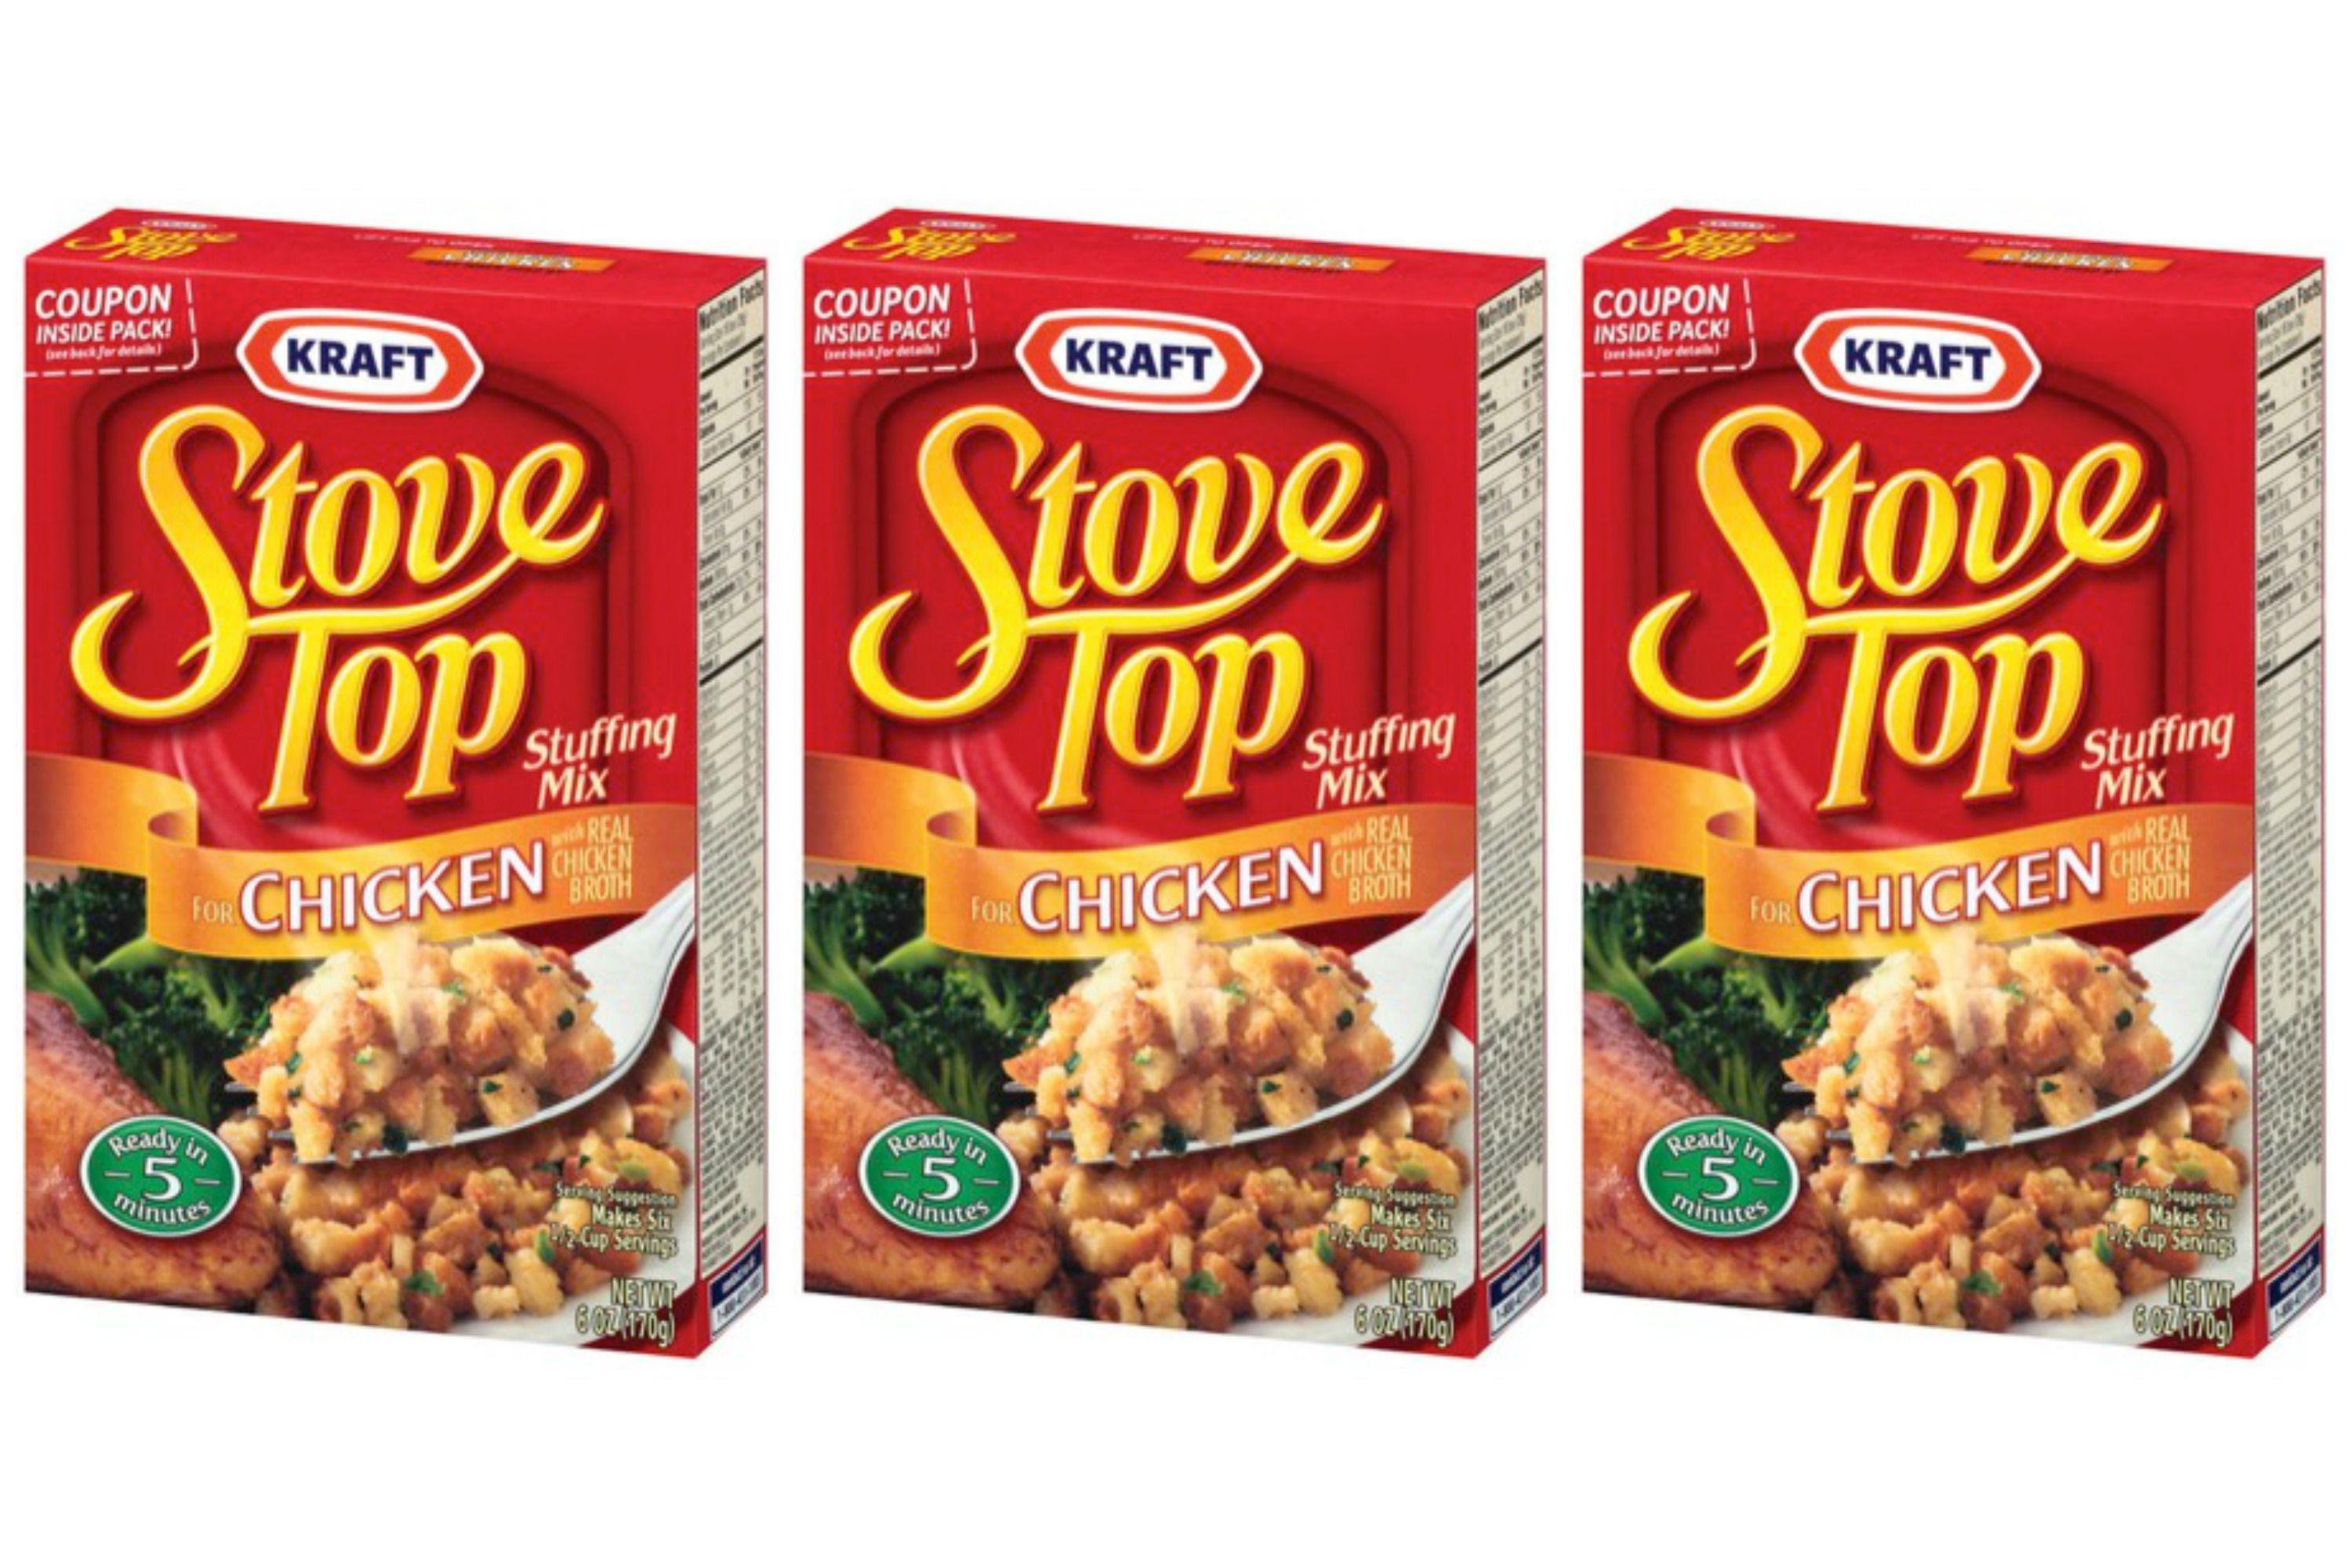 10 Things You Should Know Before Eating Stove Top Stuffing Delish Com